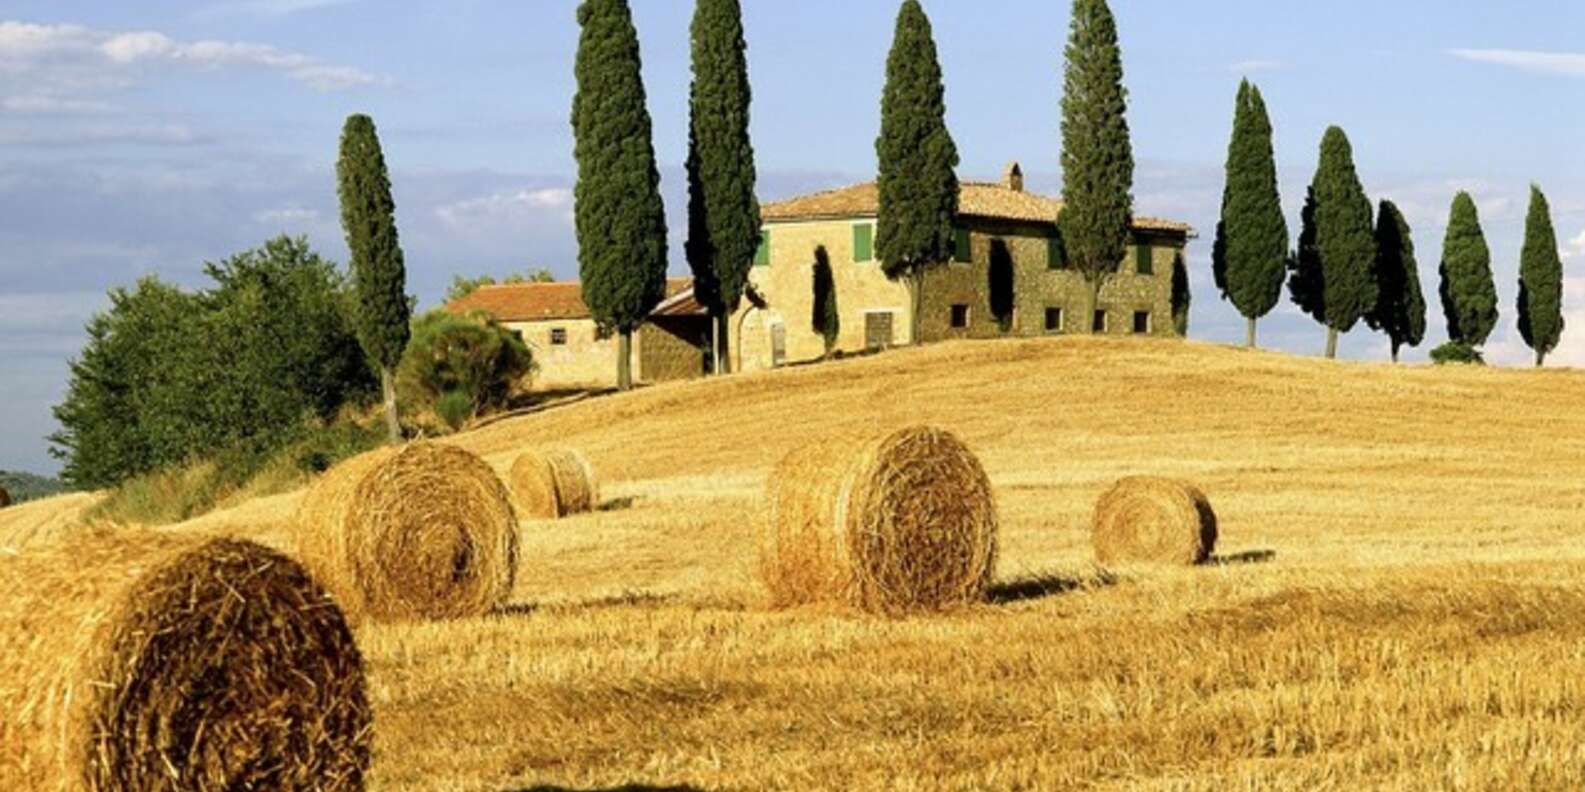 things to do in Monteriggioni